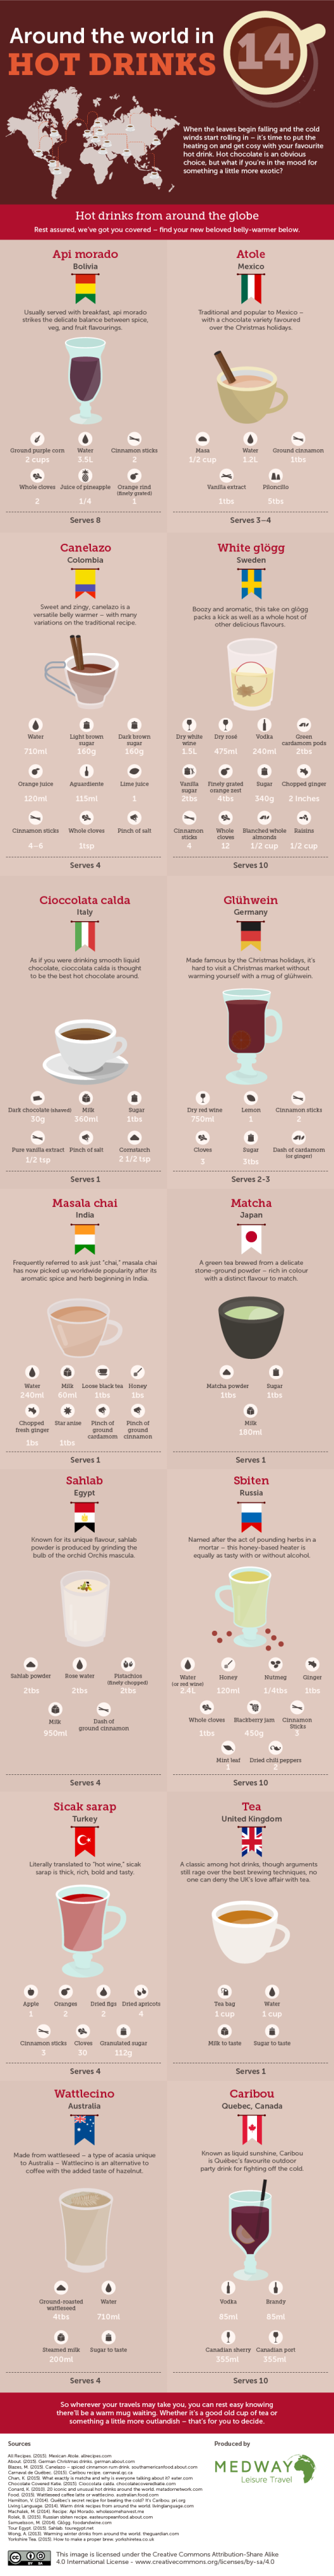 around-the-world-in-14-hot-drinks-v21